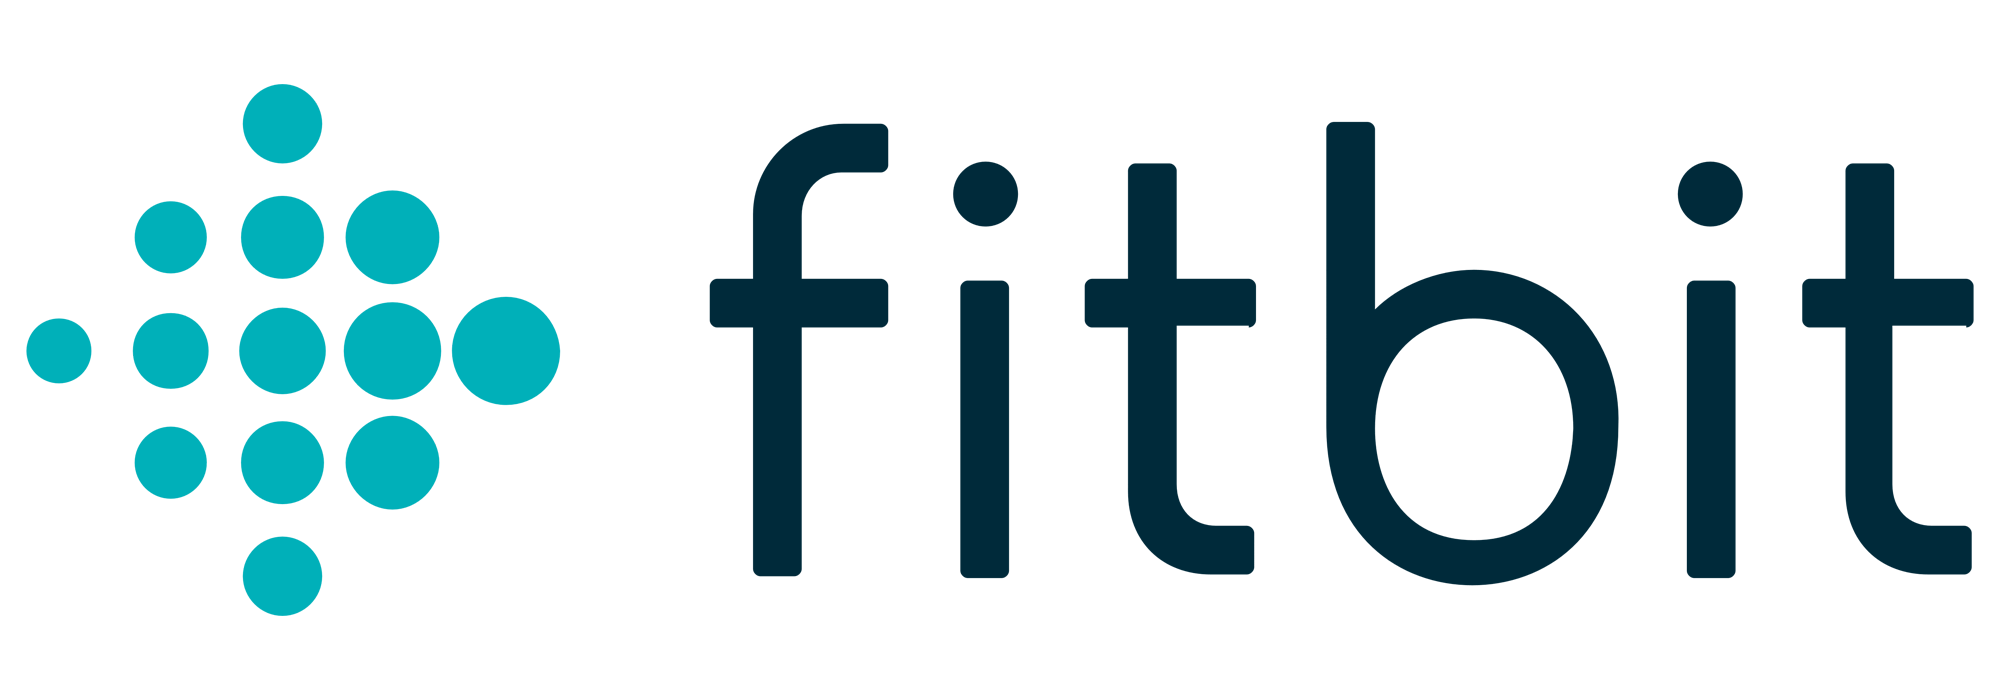 Small History Logo - Fitbit Logo, Fitbit Symbol, Meaning, History and Evolution